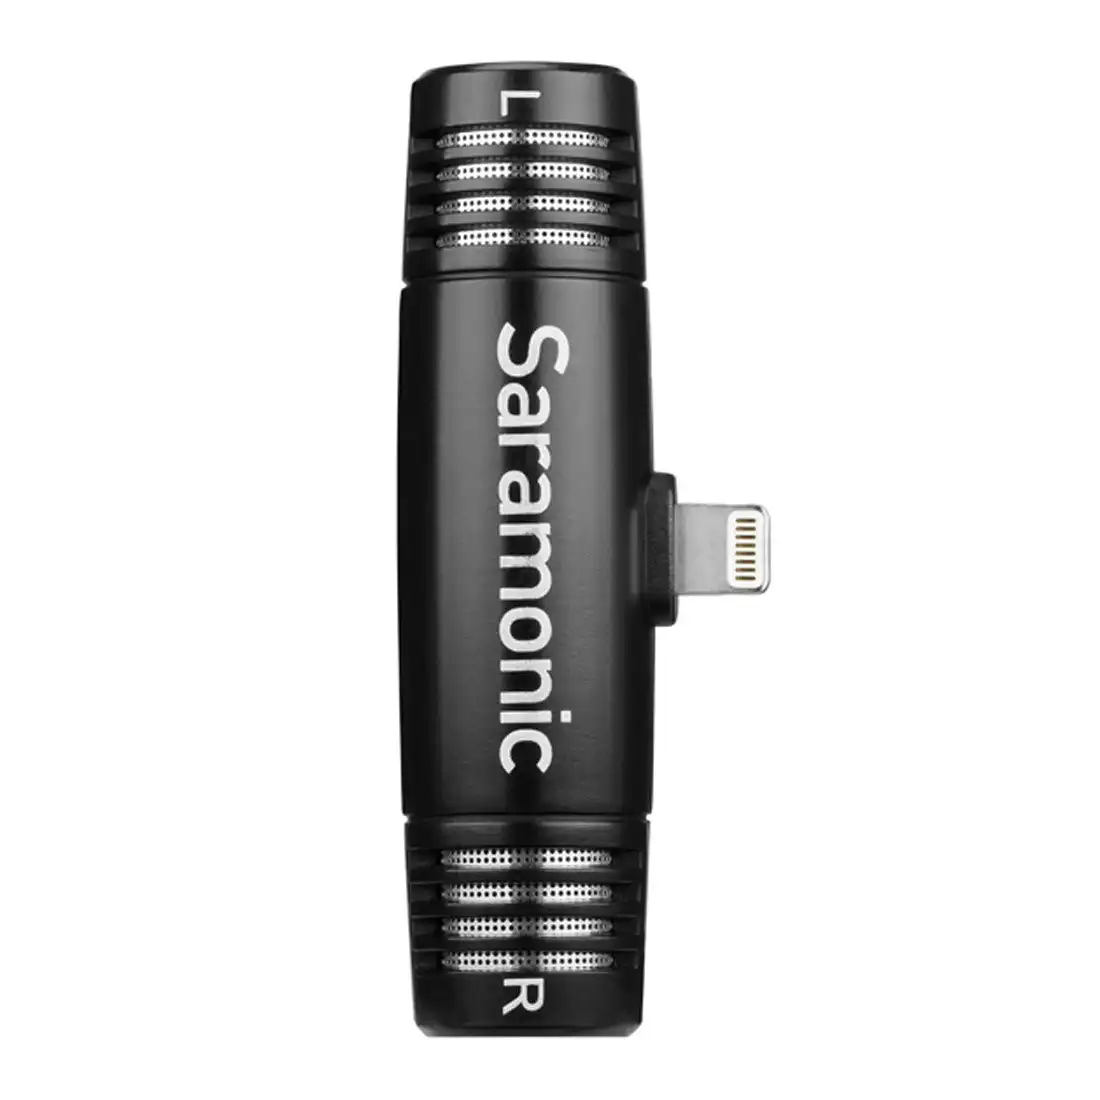 Saramonic SPMIC510DI Compact Stereo Microphone for iOS Devices with Lightning Connector